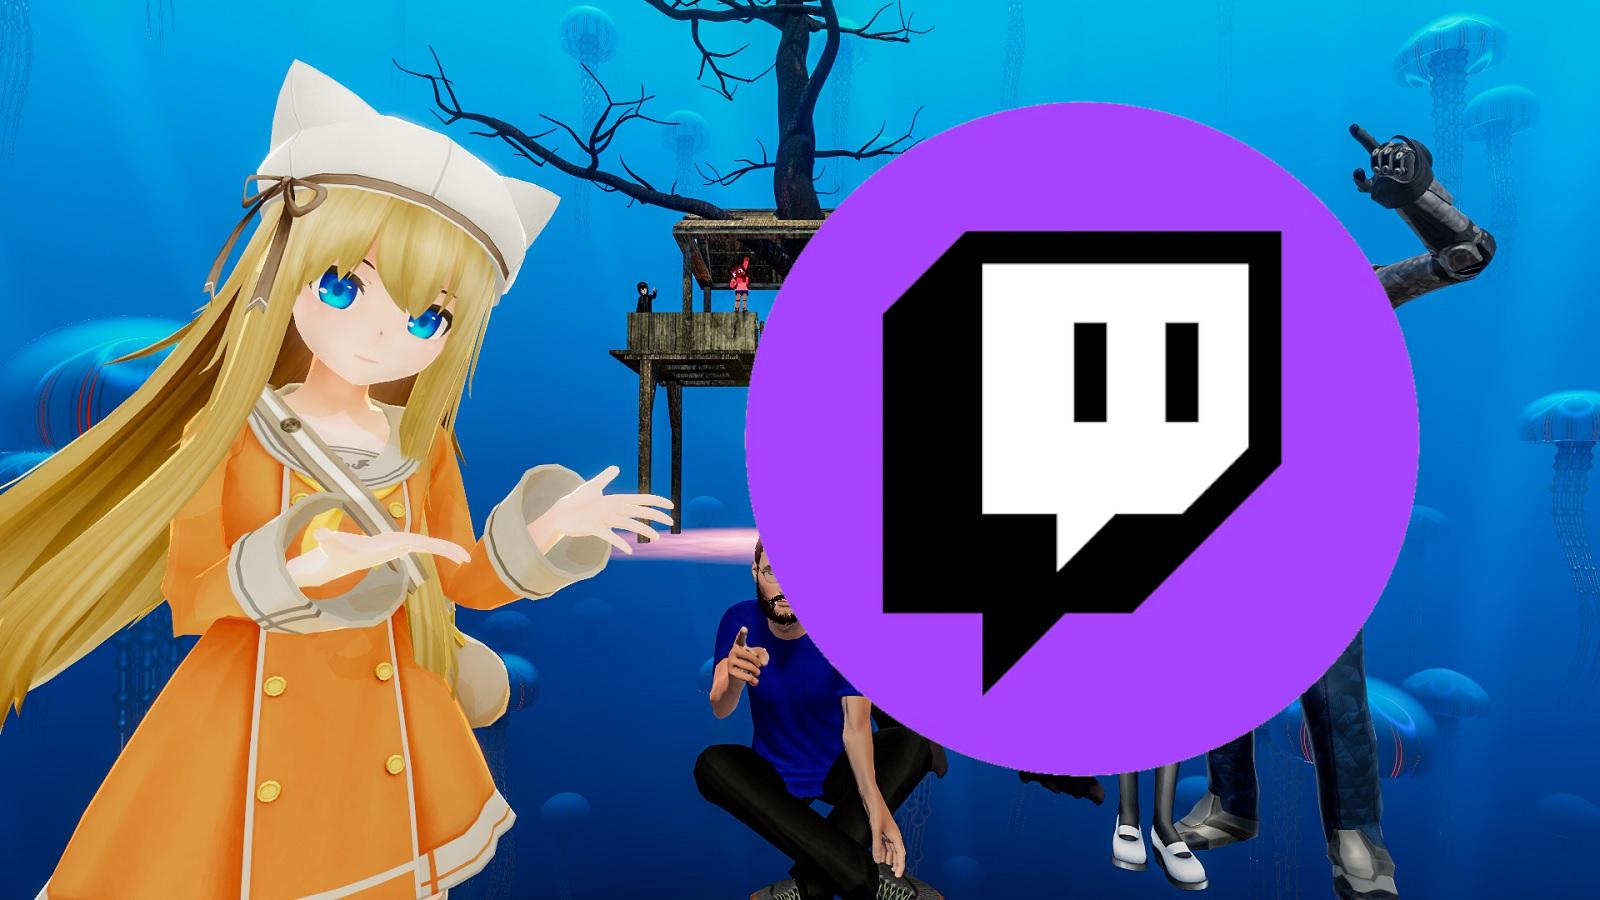 VRChat Mascot and the twitch logo rollback attire rules on VRChat avatars